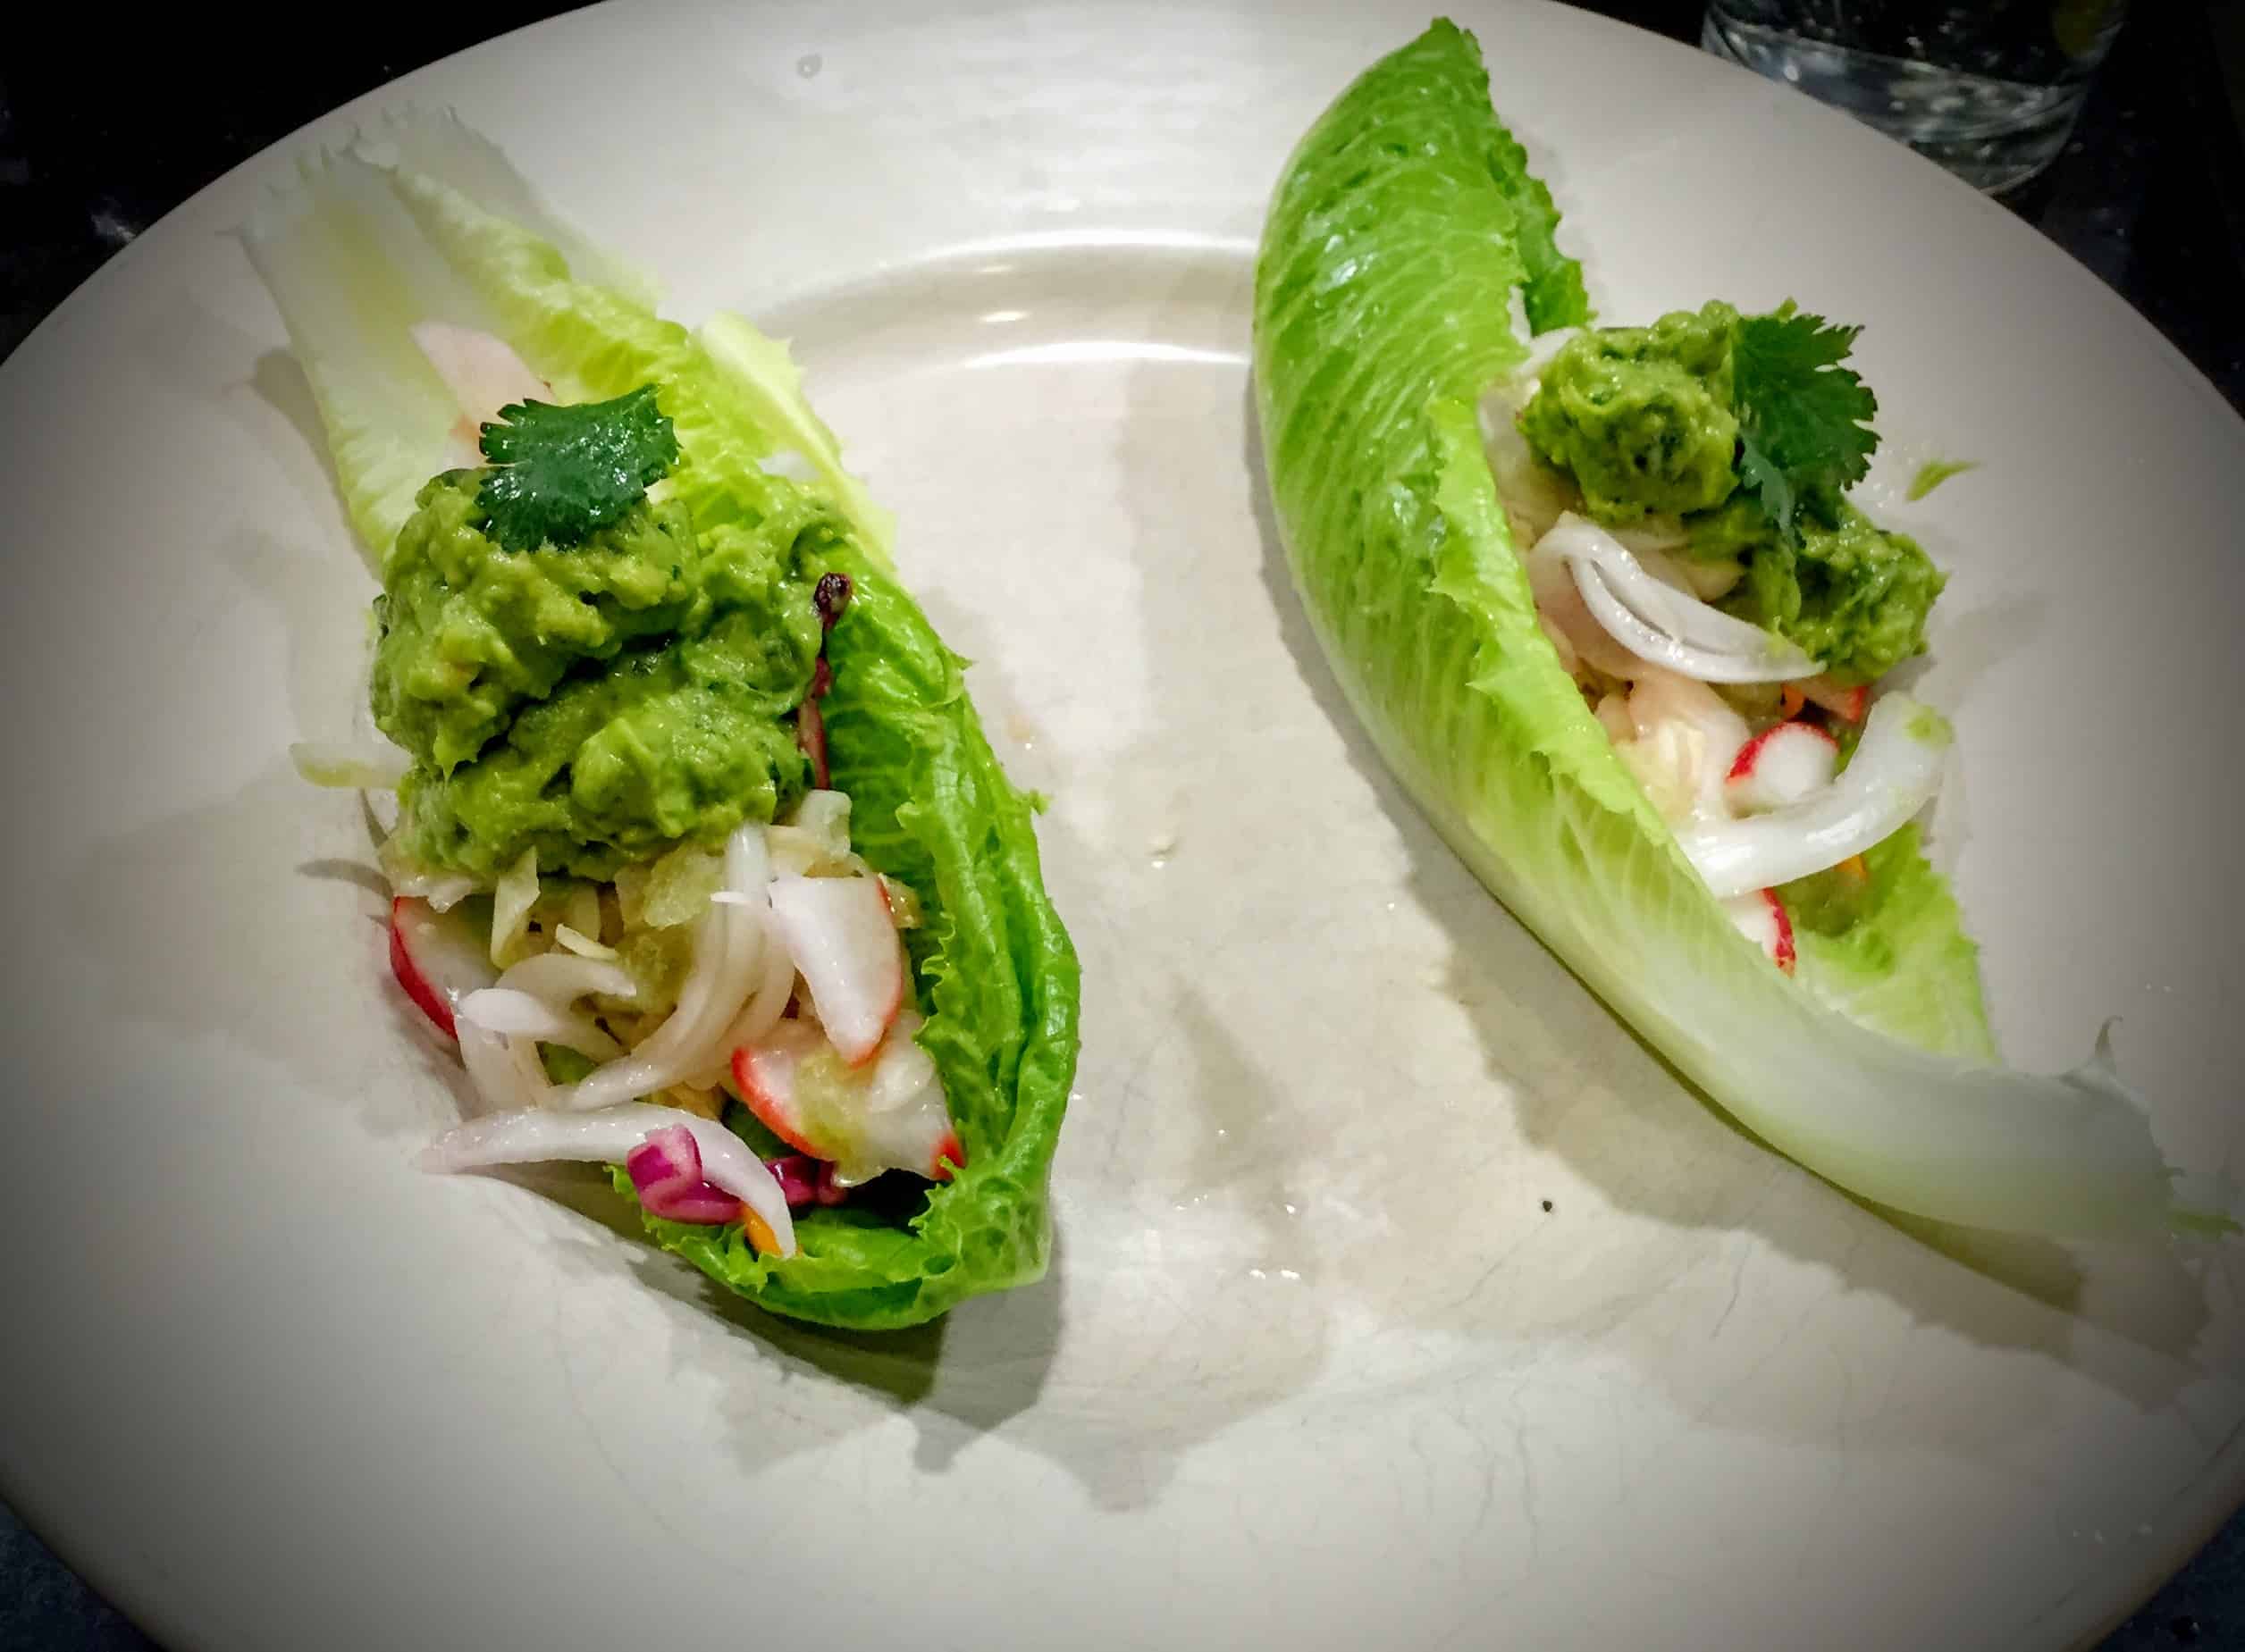 These fresh lime juice infused fish tacos are quick to make and incredibly satisfying. Not to mention healthy and very low in calories. Lime Juice is used as a base for all components, from the baked Cod with Lime-Cumin Sauce, Cabbage Radish Slaw with Lime Vinaigrette and Lime Juice based Fresh Guacamole. They are a wonderful weekday treat.